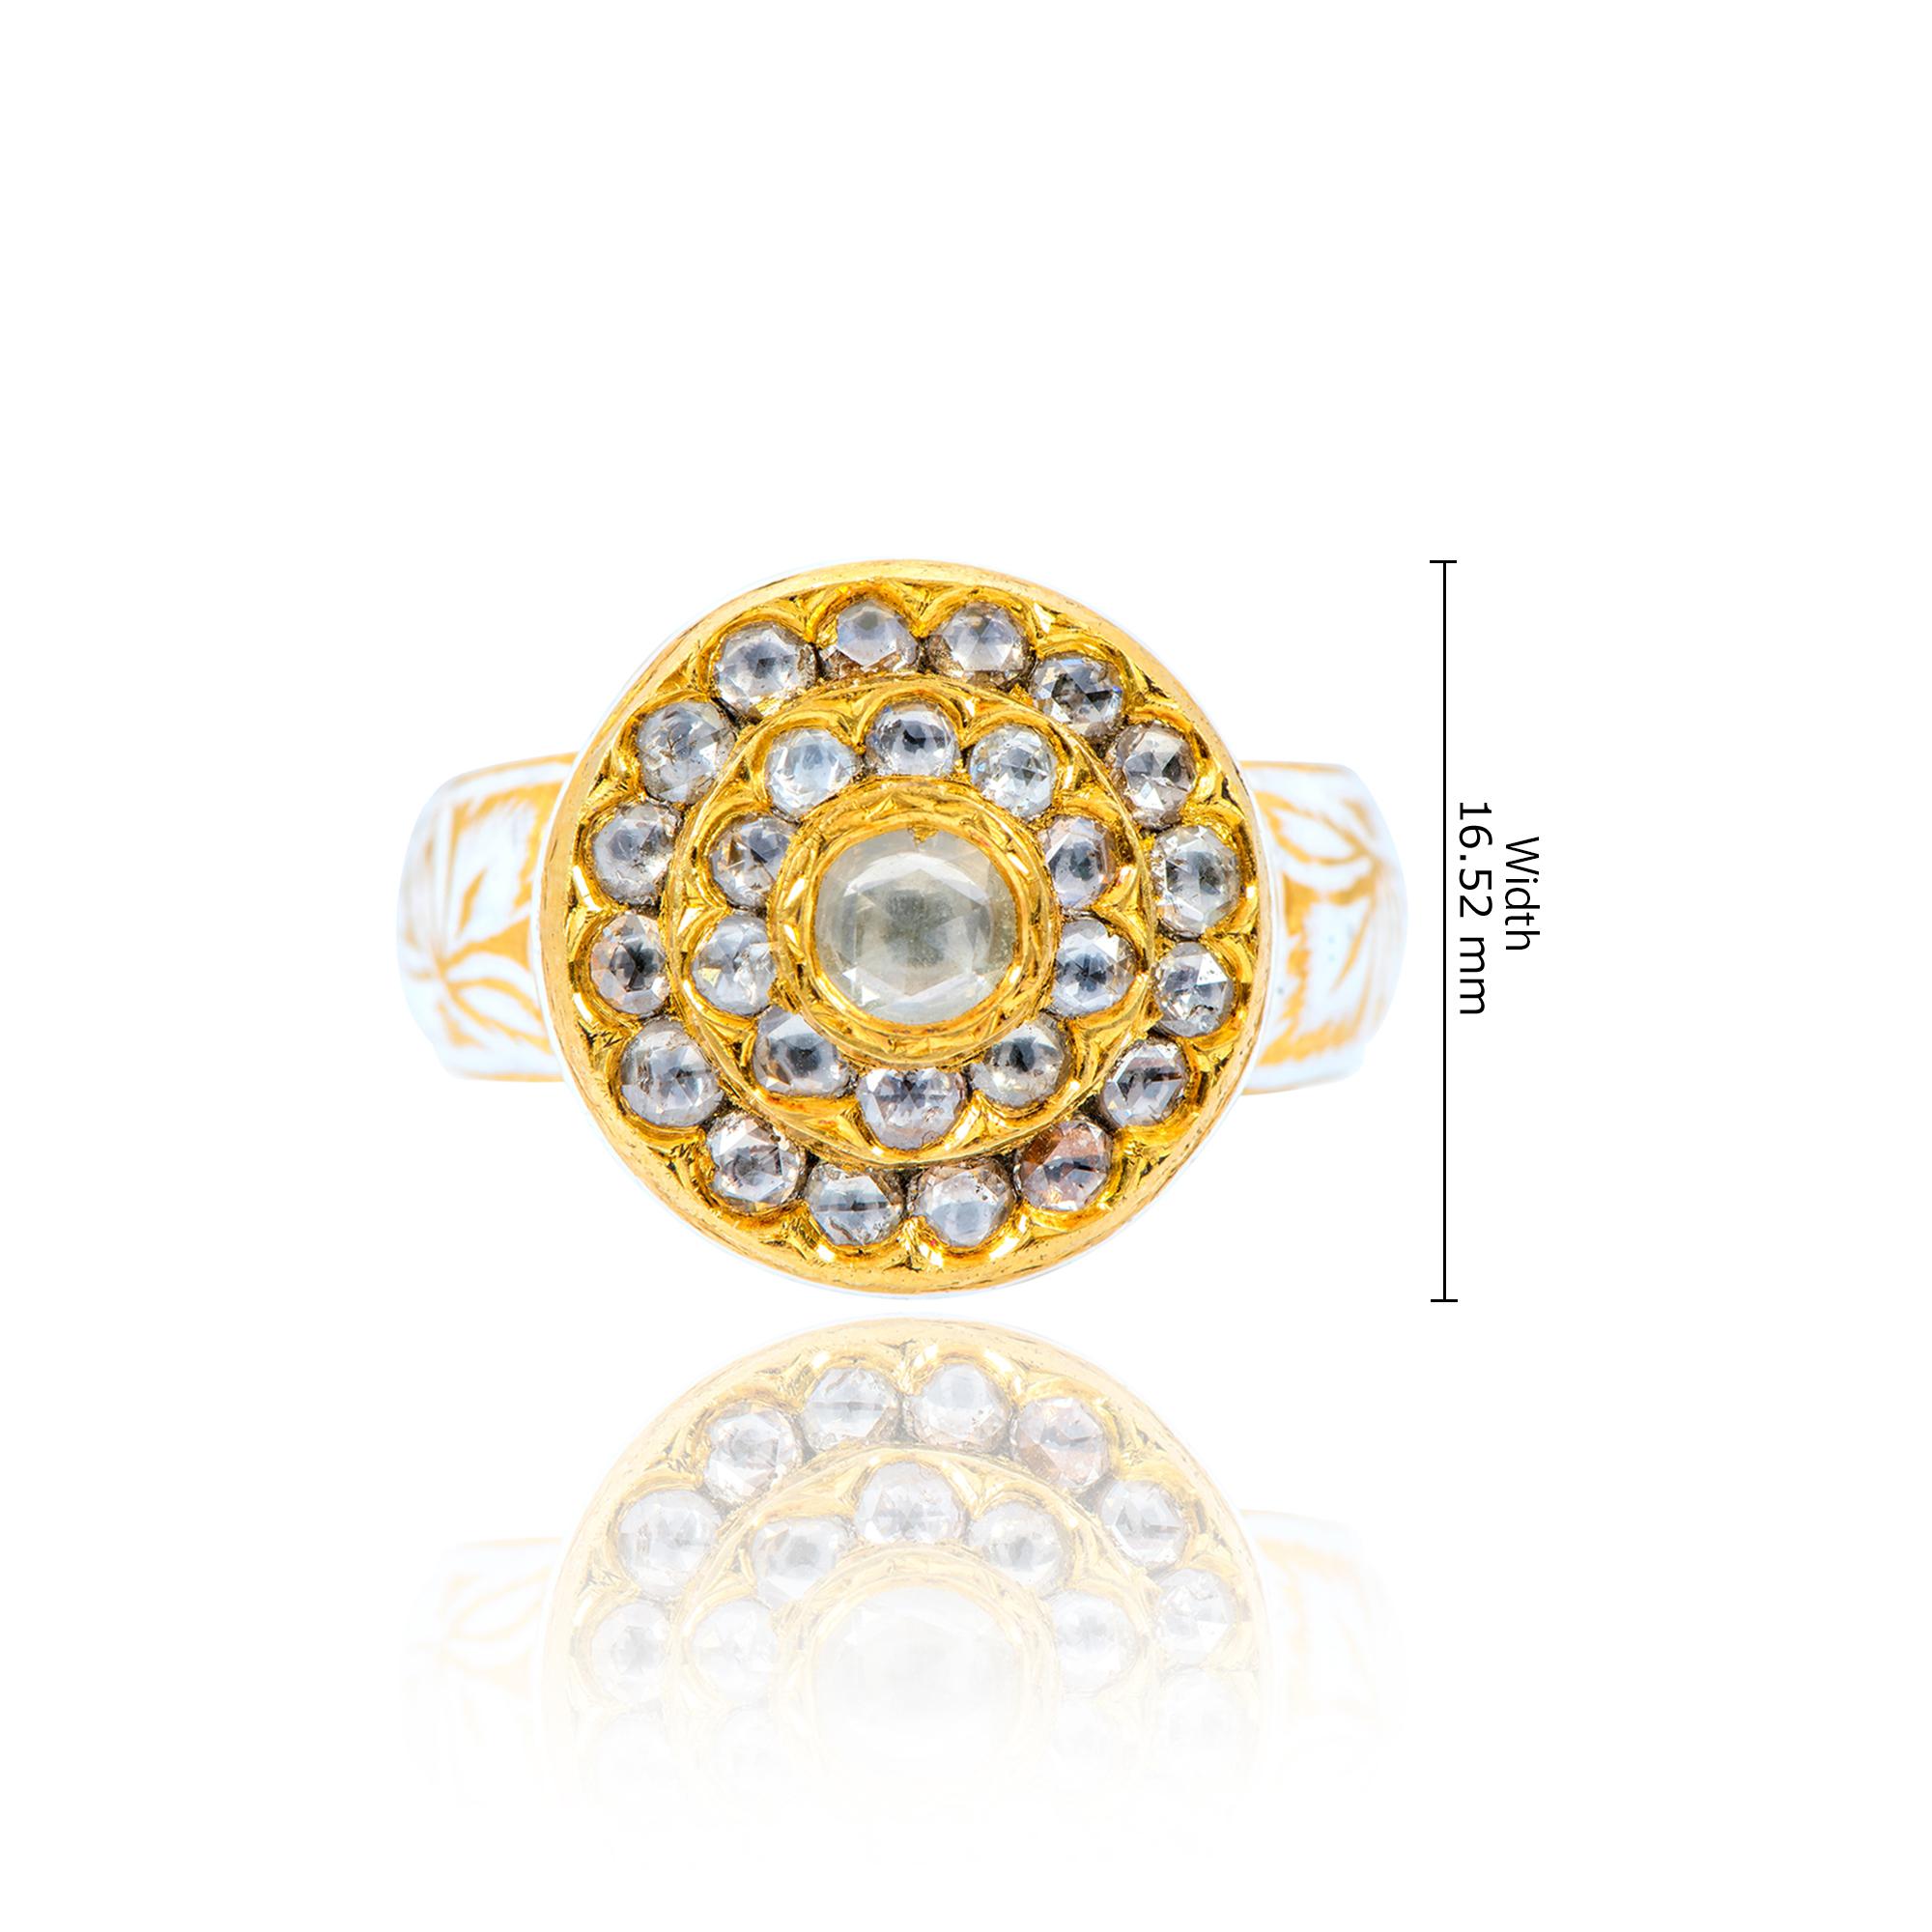 22 Karat Gold Rose-Cut Diamond Ring Handcrafted with White Enamel Work  In New Condition For Sale In Jaipur, IN